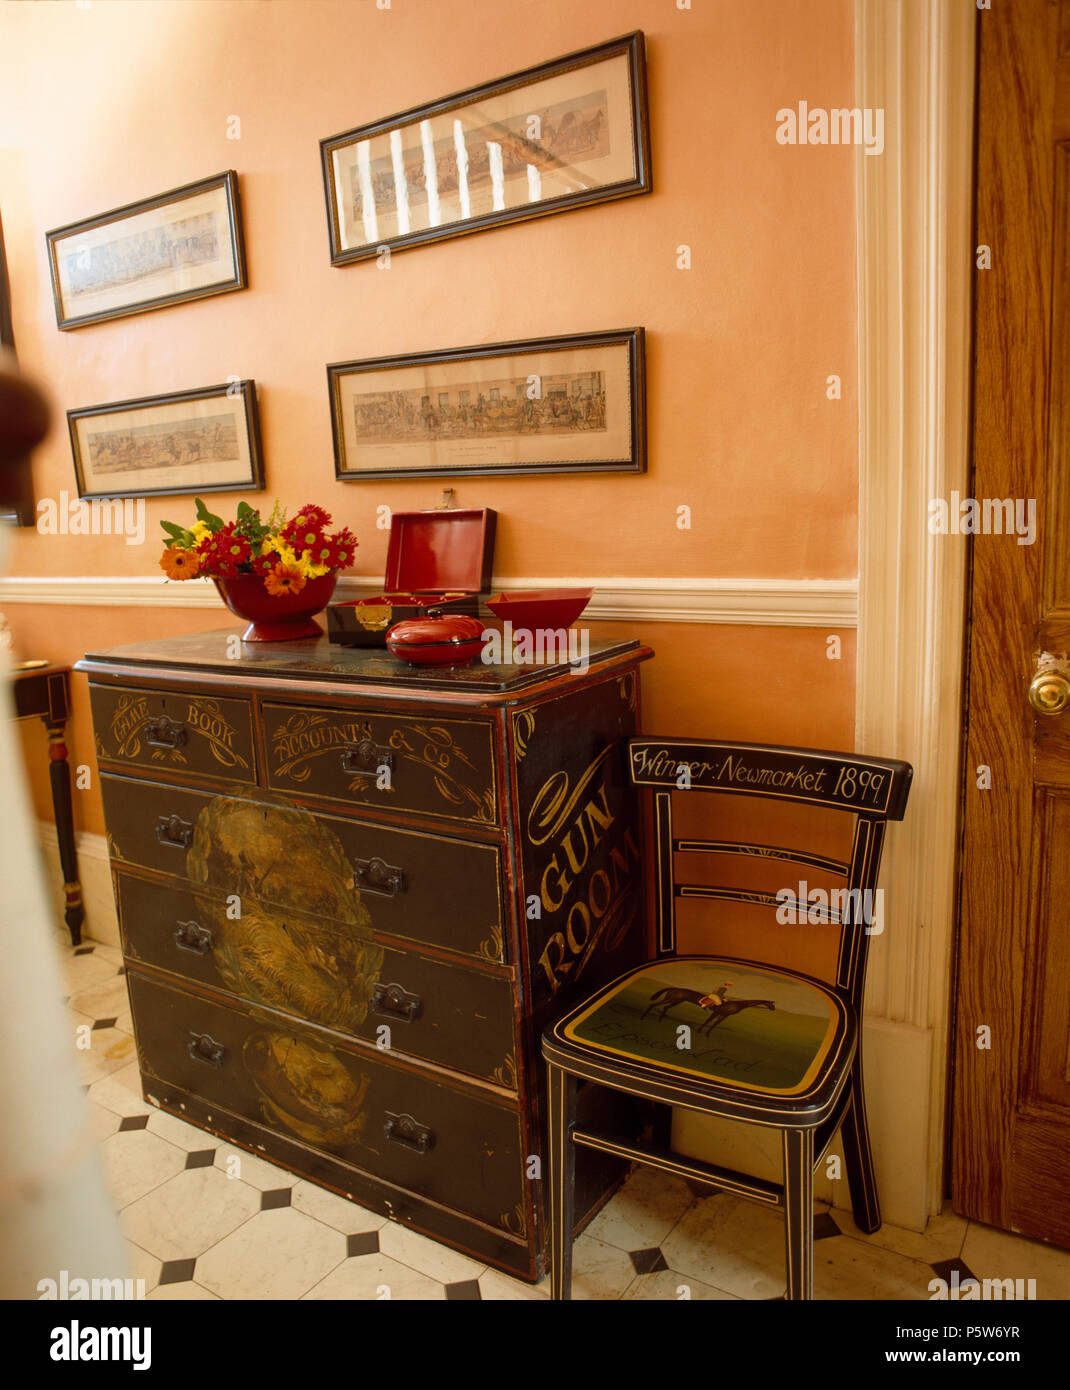 Decoratively-painted vintage chest-of-drawers and chair in pale terracotta-painted hall Stock Photo